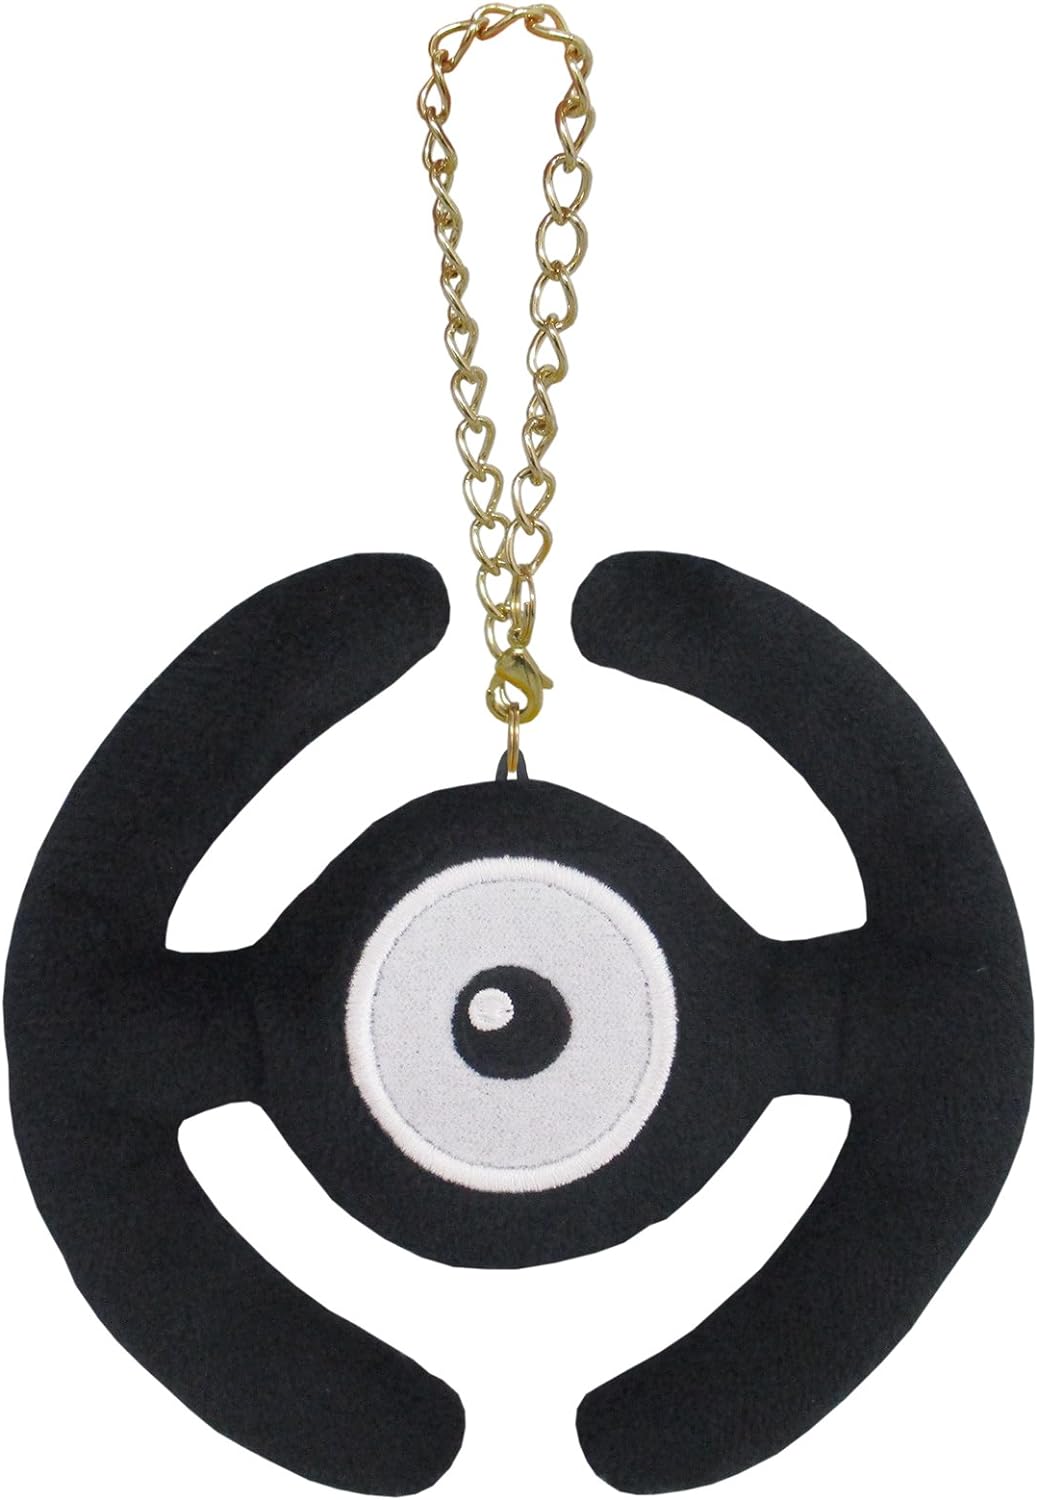 Unown H All Star Collection Mascot Plush Keychain